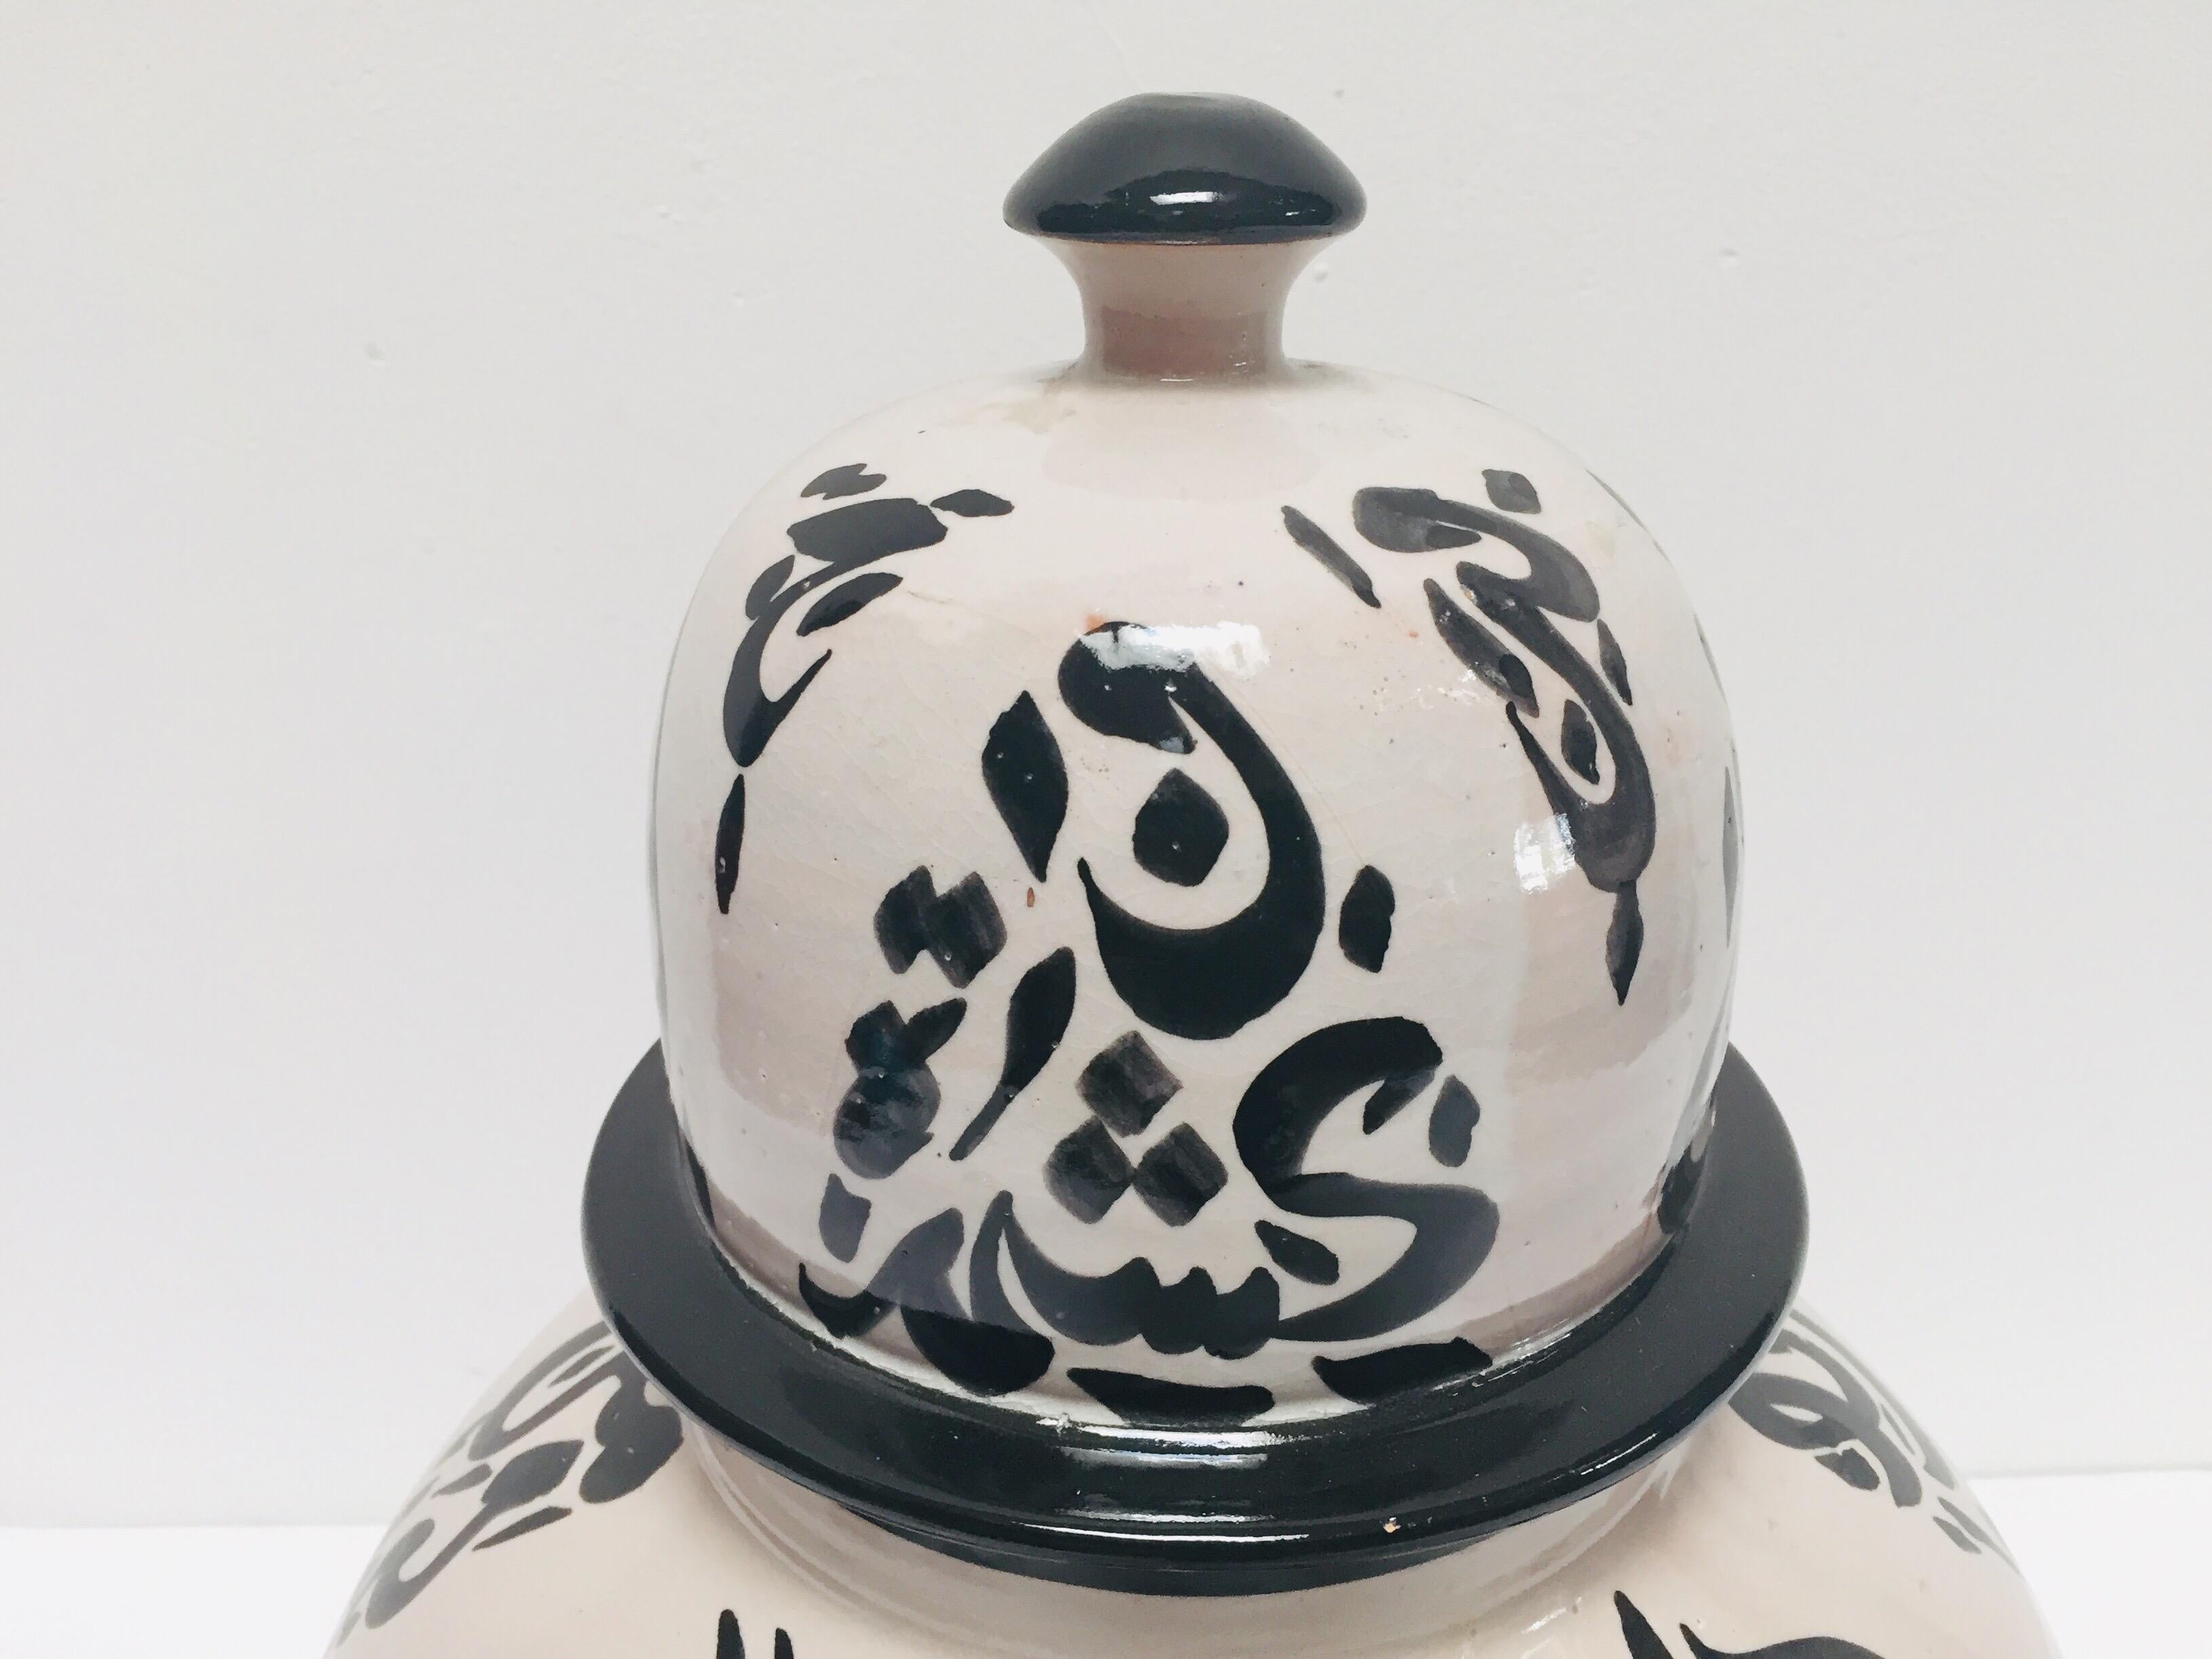 Moorish Ceramic Lidded Urn with Arabic Calligraphy Lettrism Black Writing In Good Condition For Sale In North Hollywood, CA